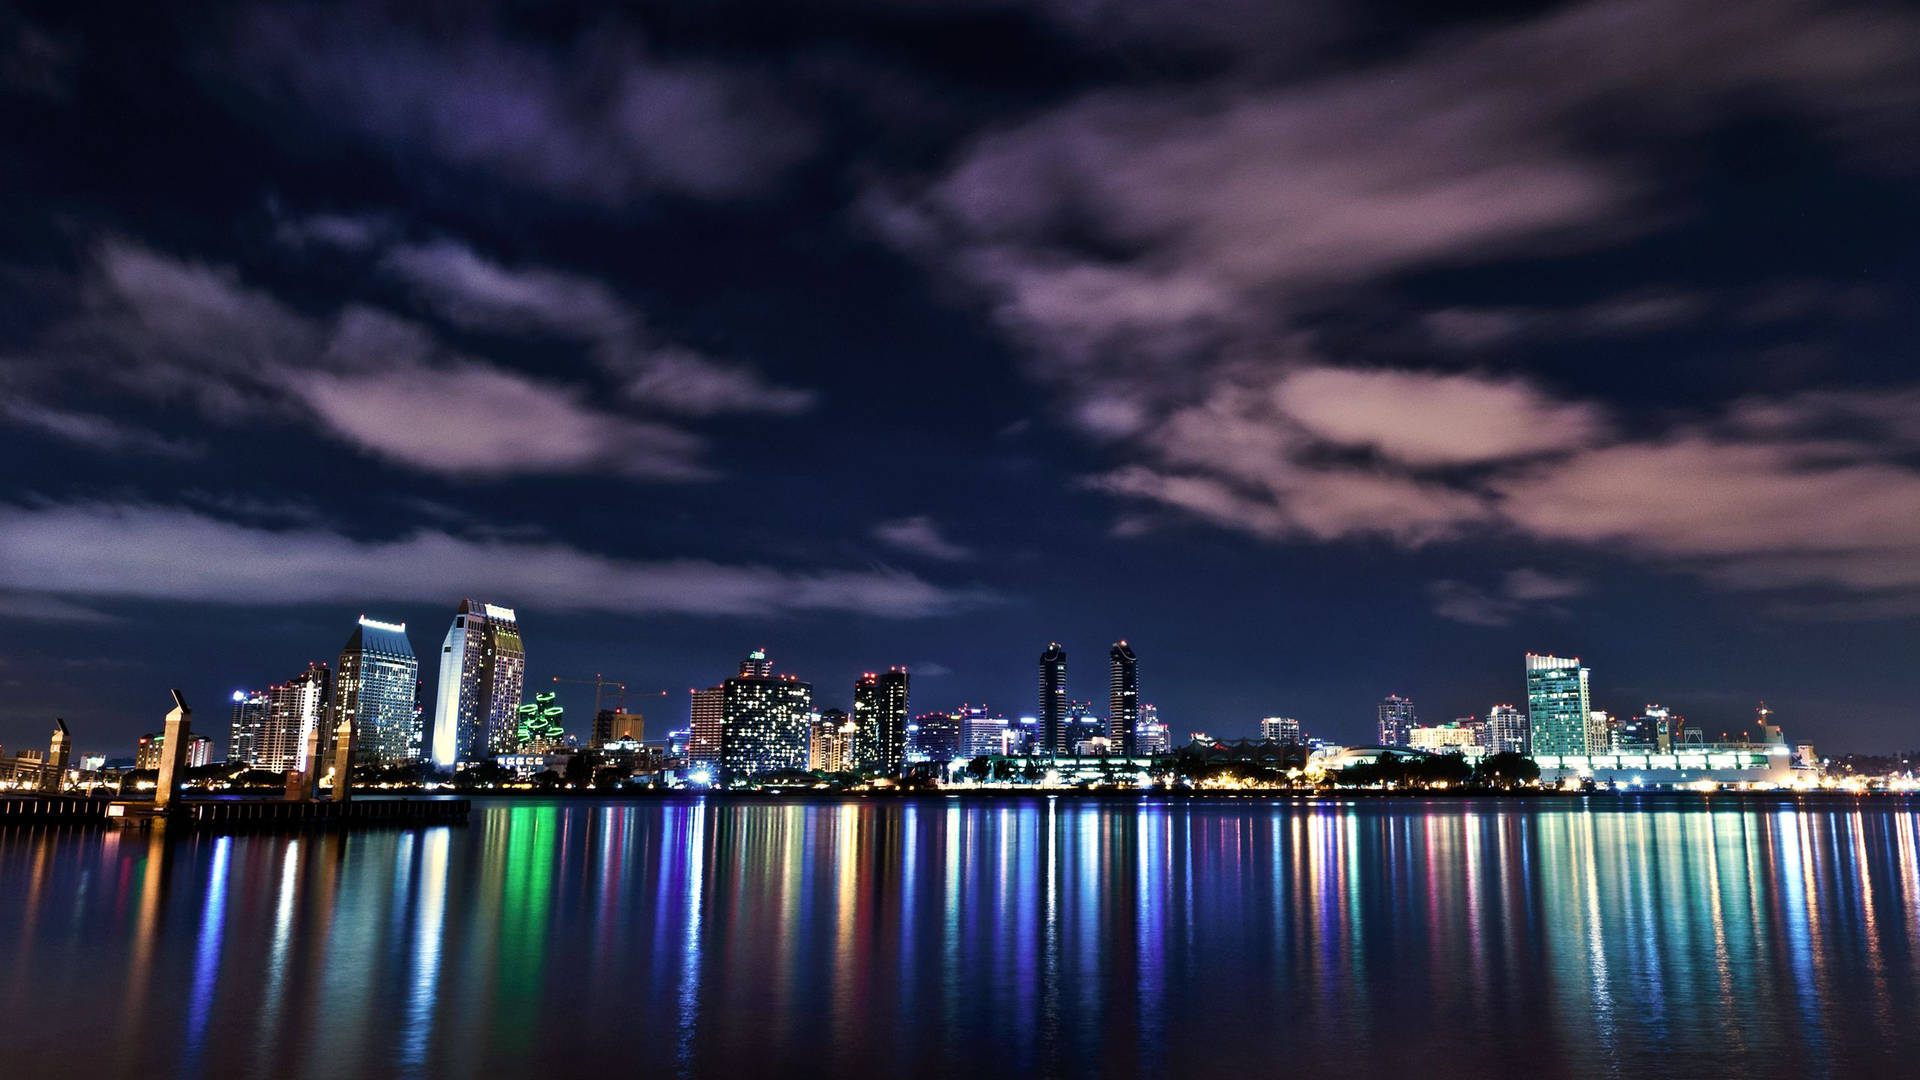 Night view of a city skyline silhouetted against a calm river Wallpaper